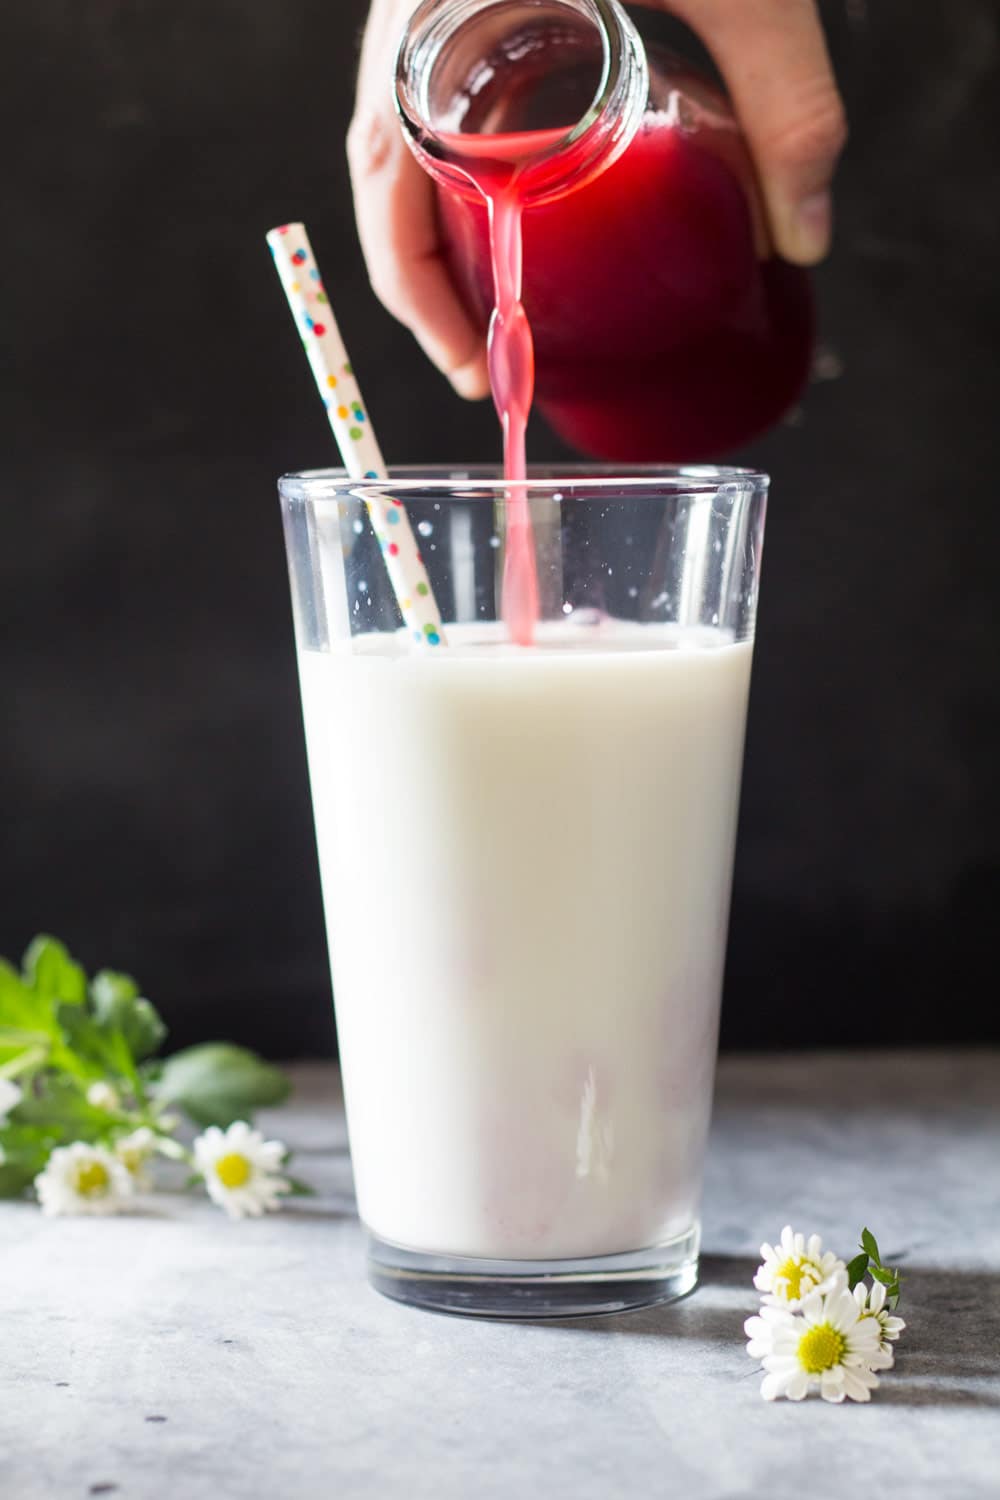 Raspberry juice being poured into a tall glass of milk with a confetti straw.